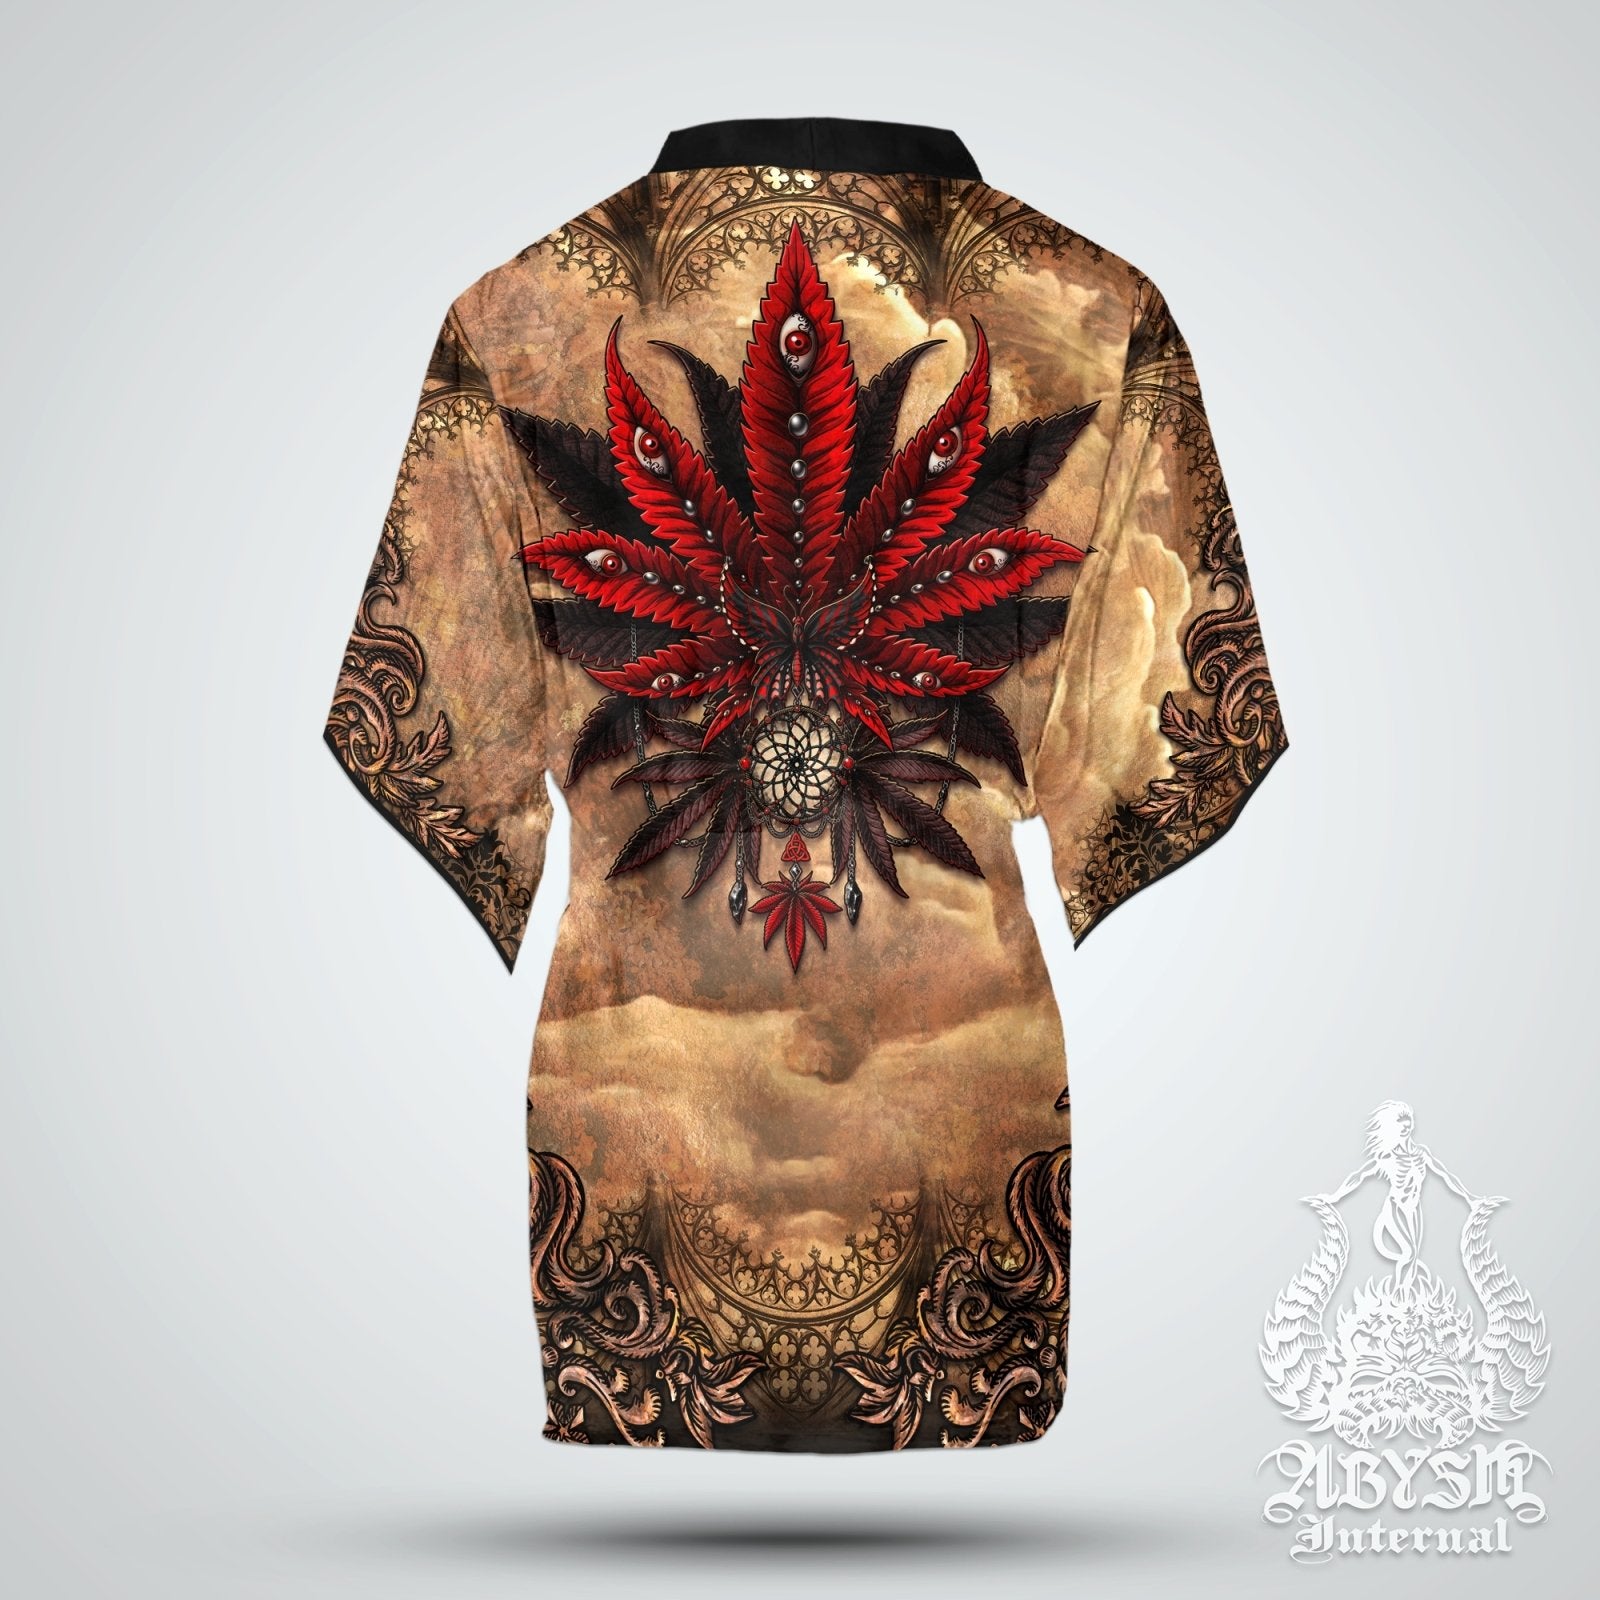 Gothic Weed Cover Up, Cannabis Outfit, Party Kimono, Goth Summer Festival Robe, 420 Gift, Alternative Clothing, Unisex - Marijuana, Horror Beige - Abysm Internal